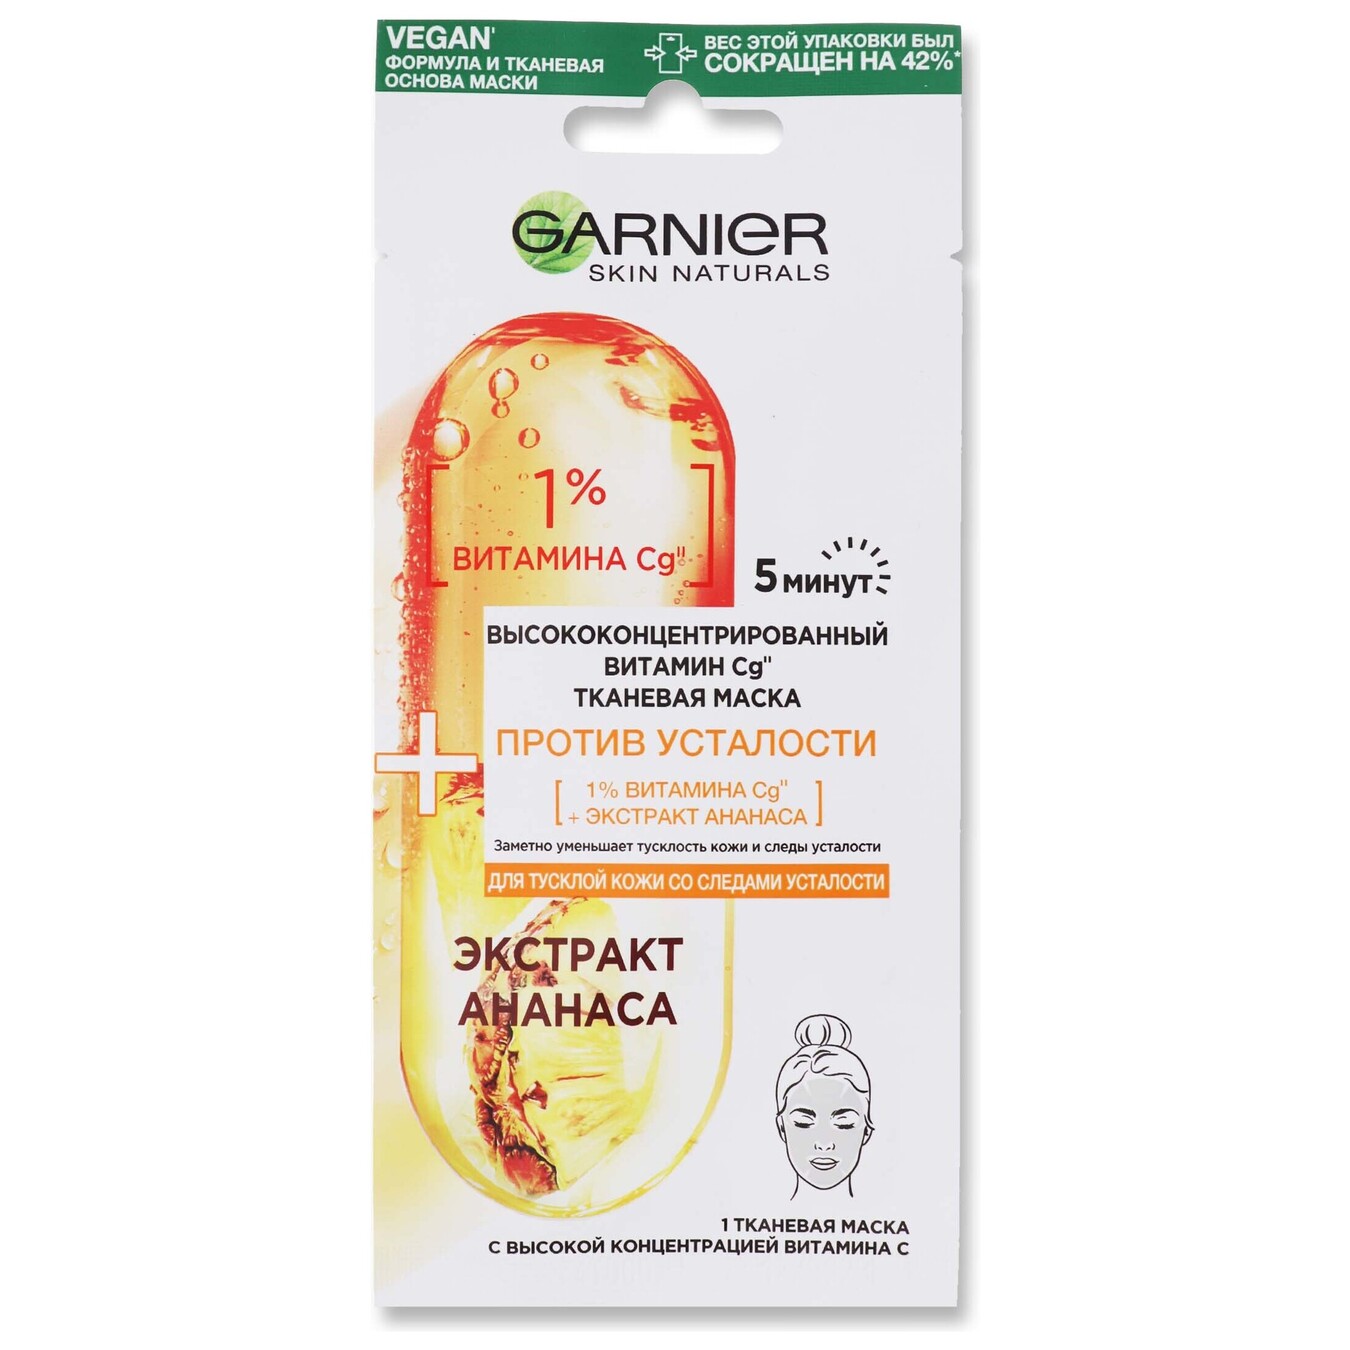 Fabric mask Garnier against fatigue with a high concentration of vitamin C for dull facial skin with signs of fatigue 15g